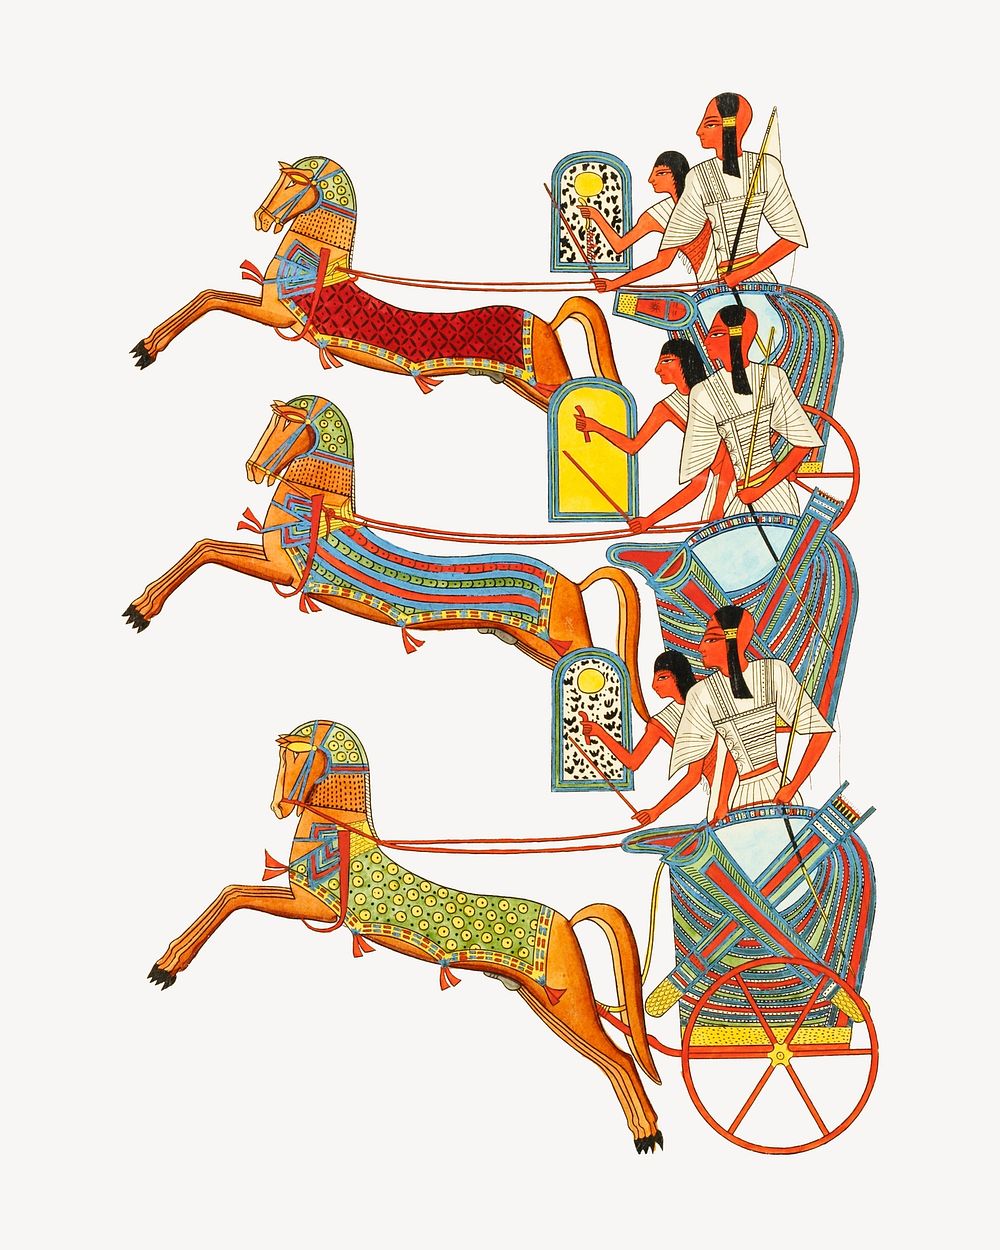 Egyptian chariot vintage illustration psd. Remixed by rawpixel.